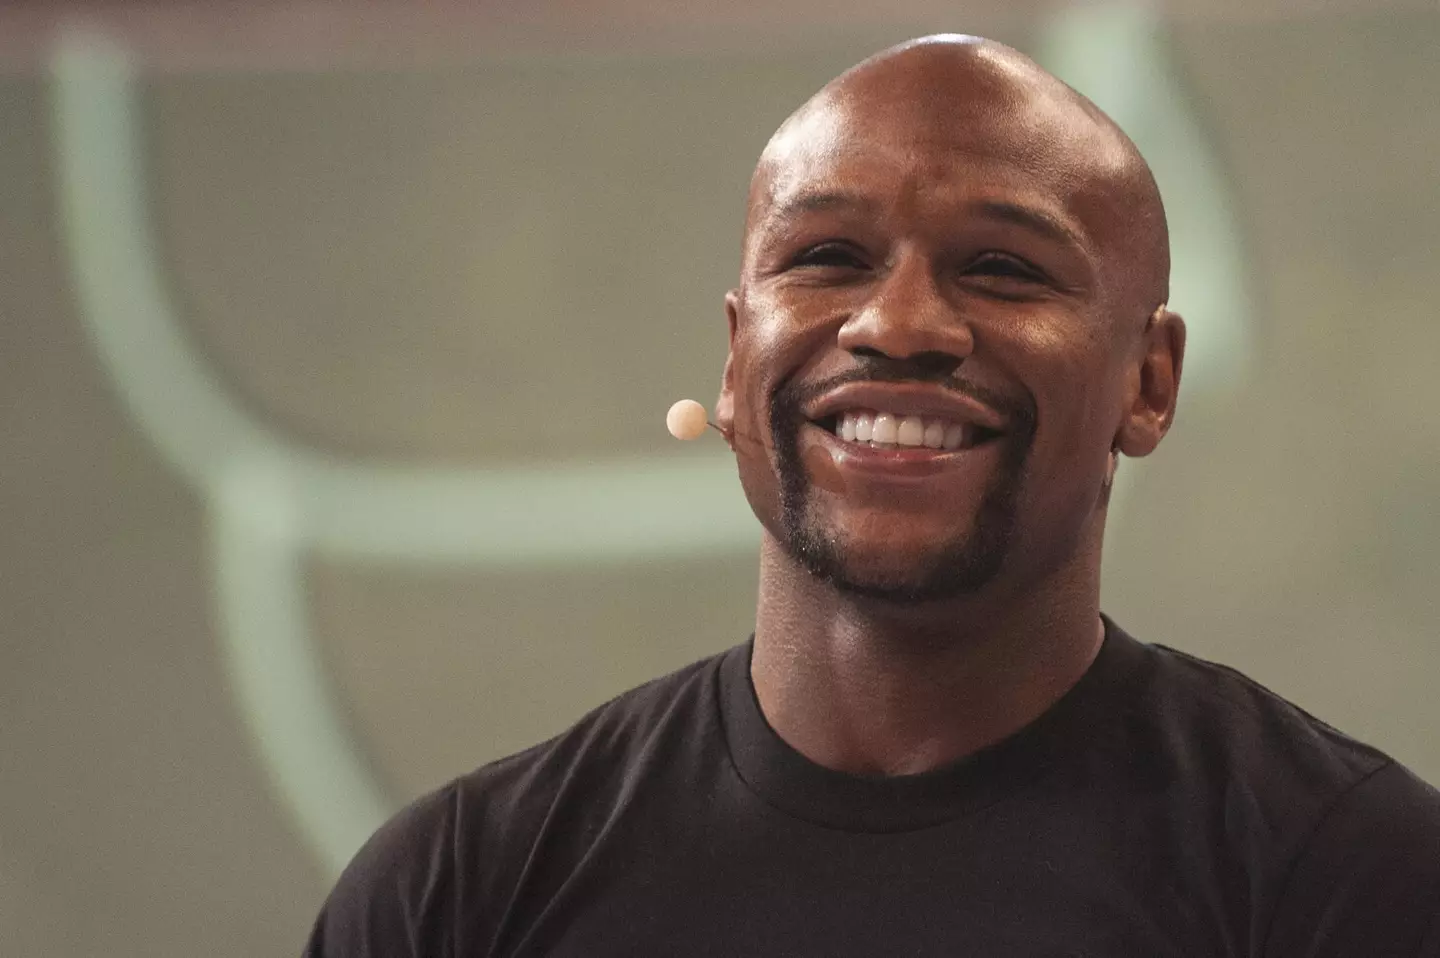 Boxing legend Floyd Mayweather destroyed YouTuber Deji in their hotly anticipated exhibition fight.